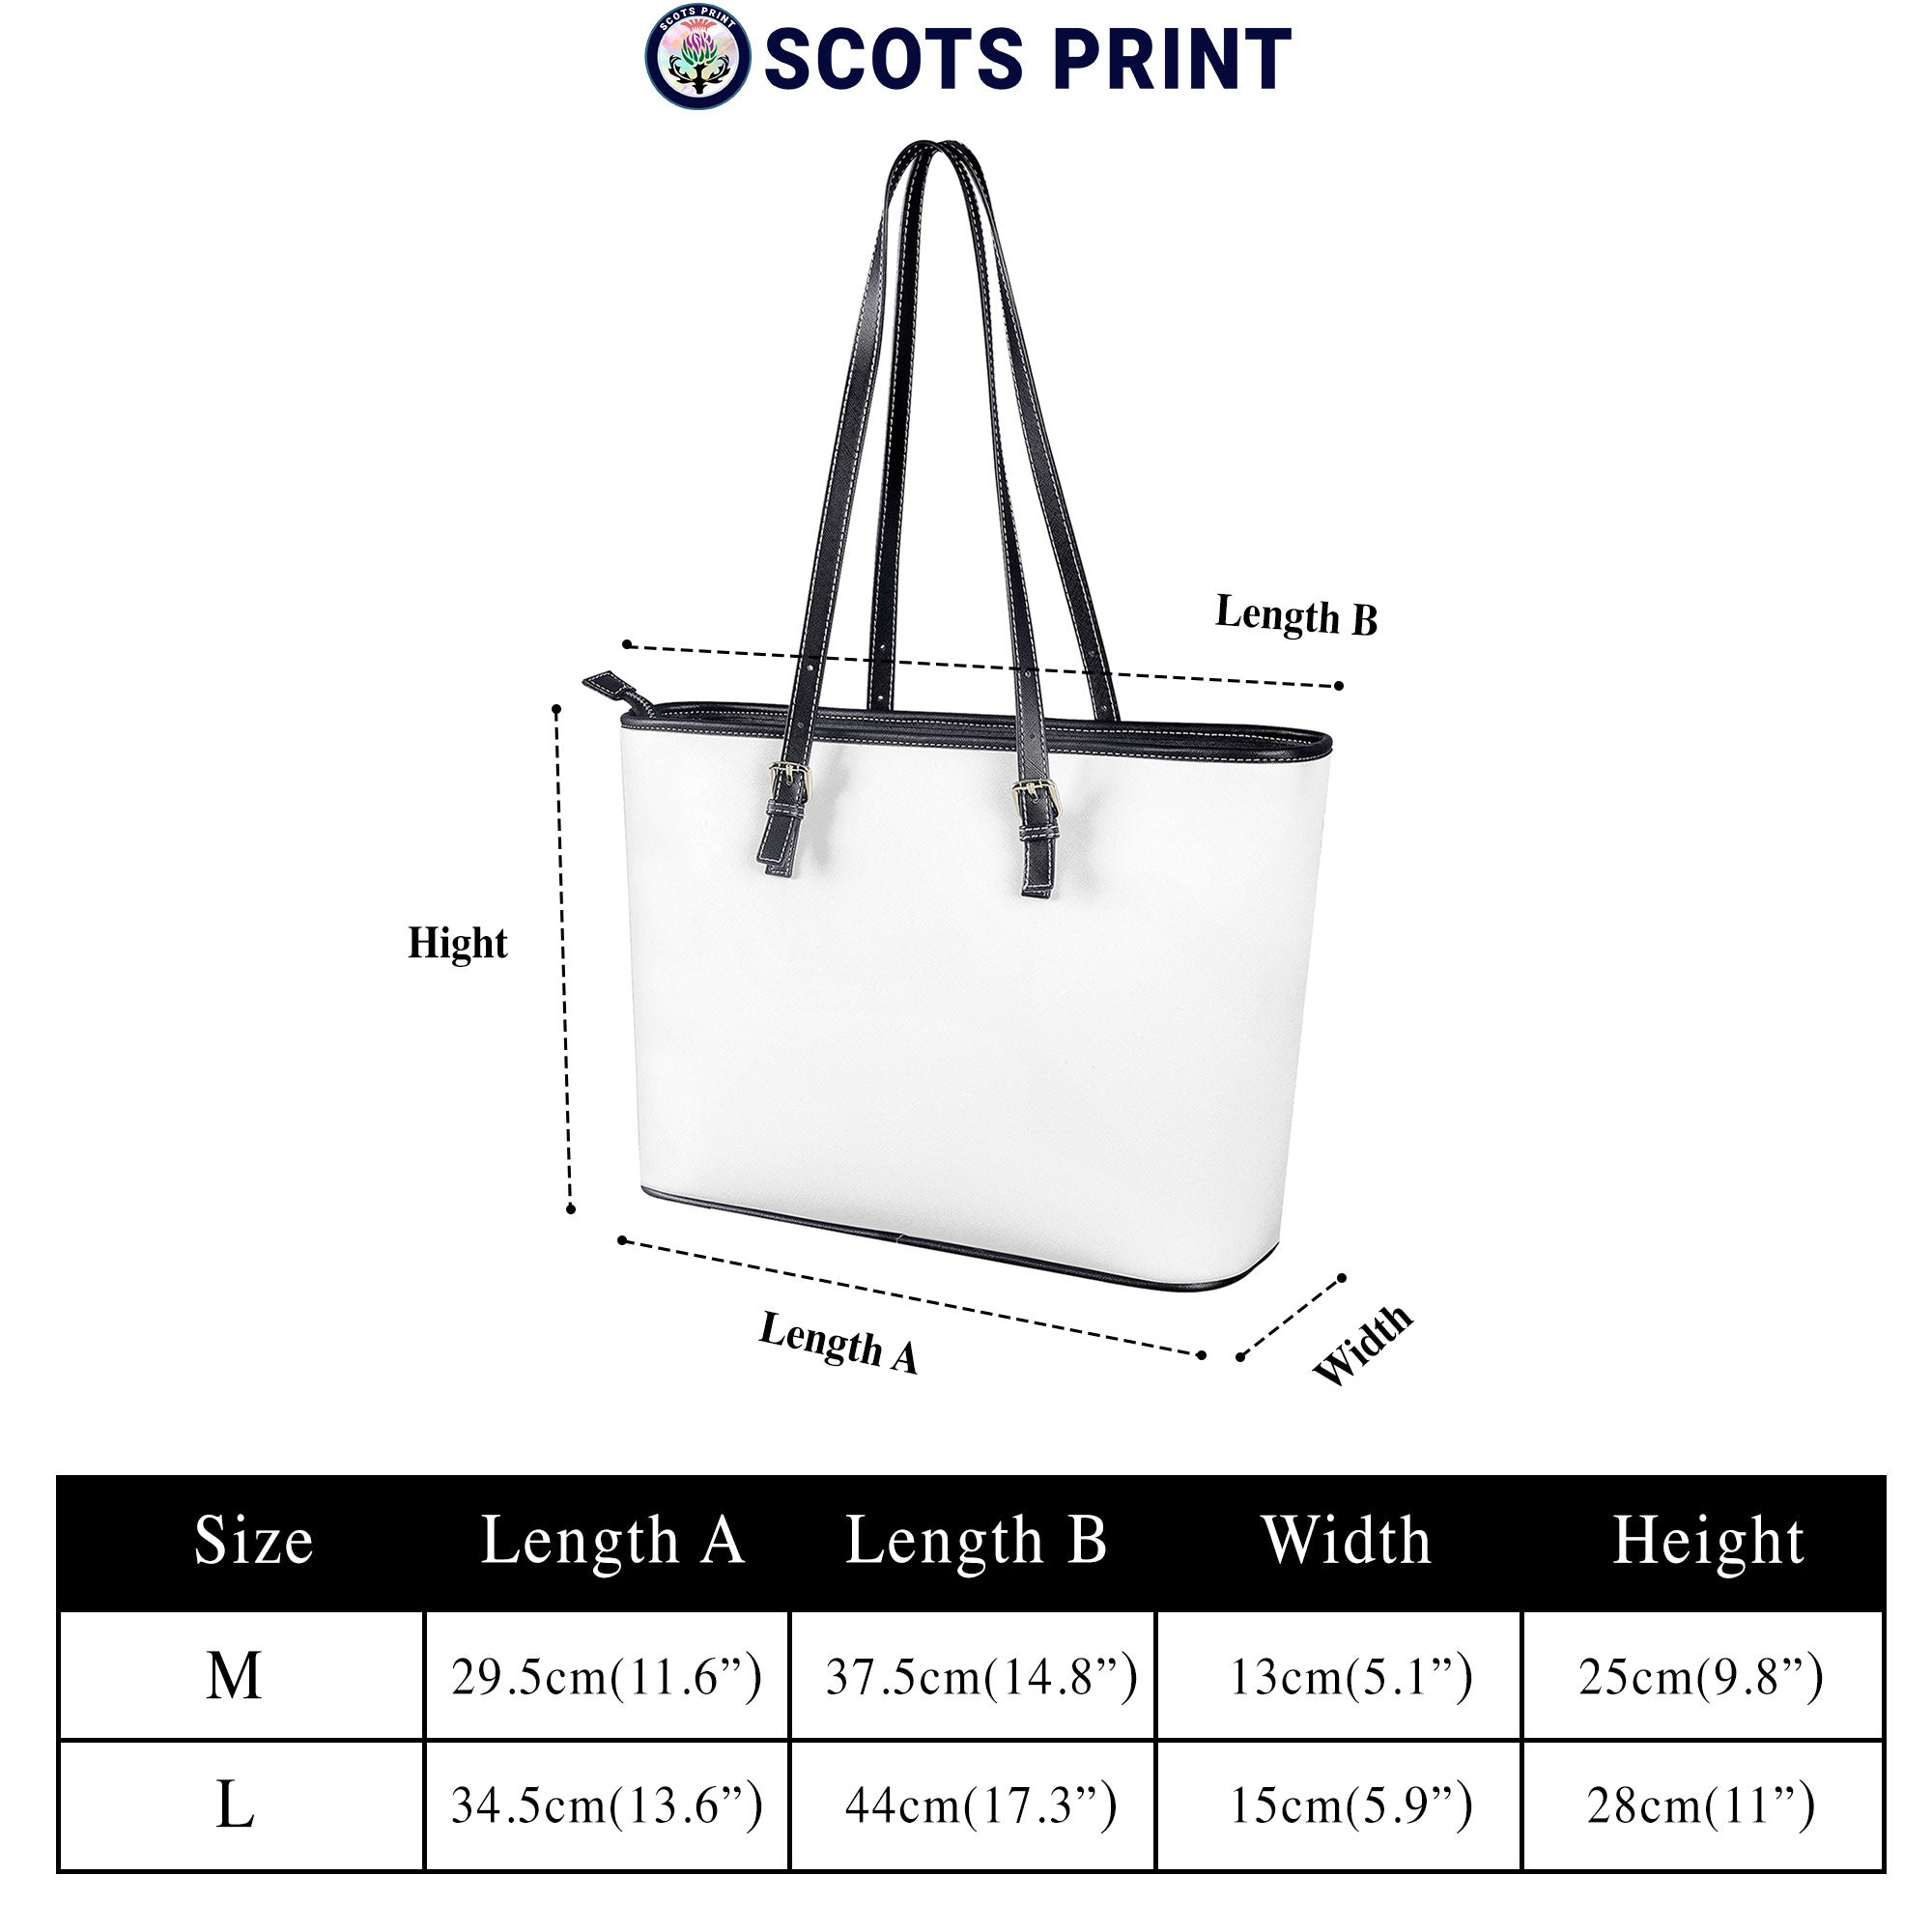 Monteith Tartan Crest Leather Tote Bag